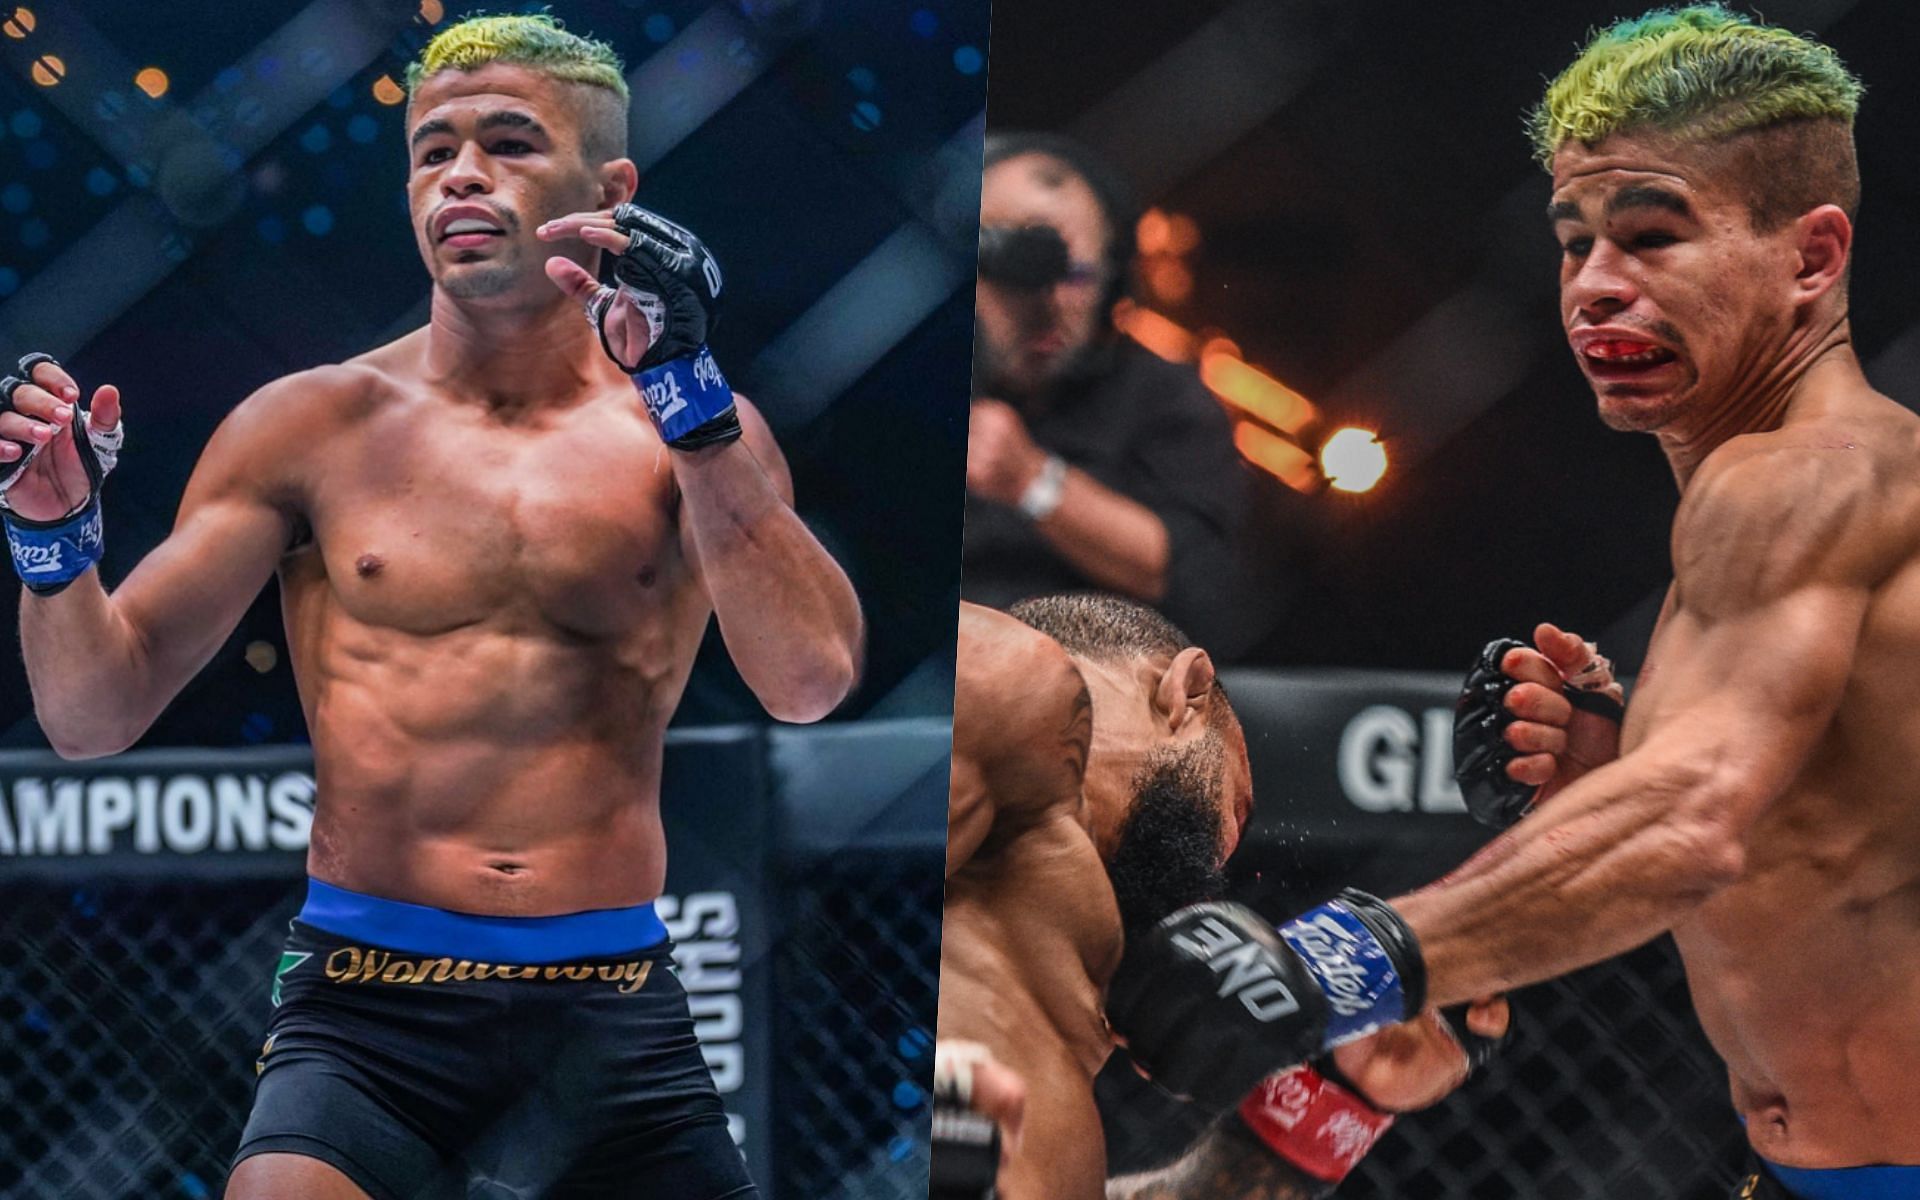 Fabricio Andrade is eager to finish the job against John Lineker in their rematch. | Photo by ONE Championship